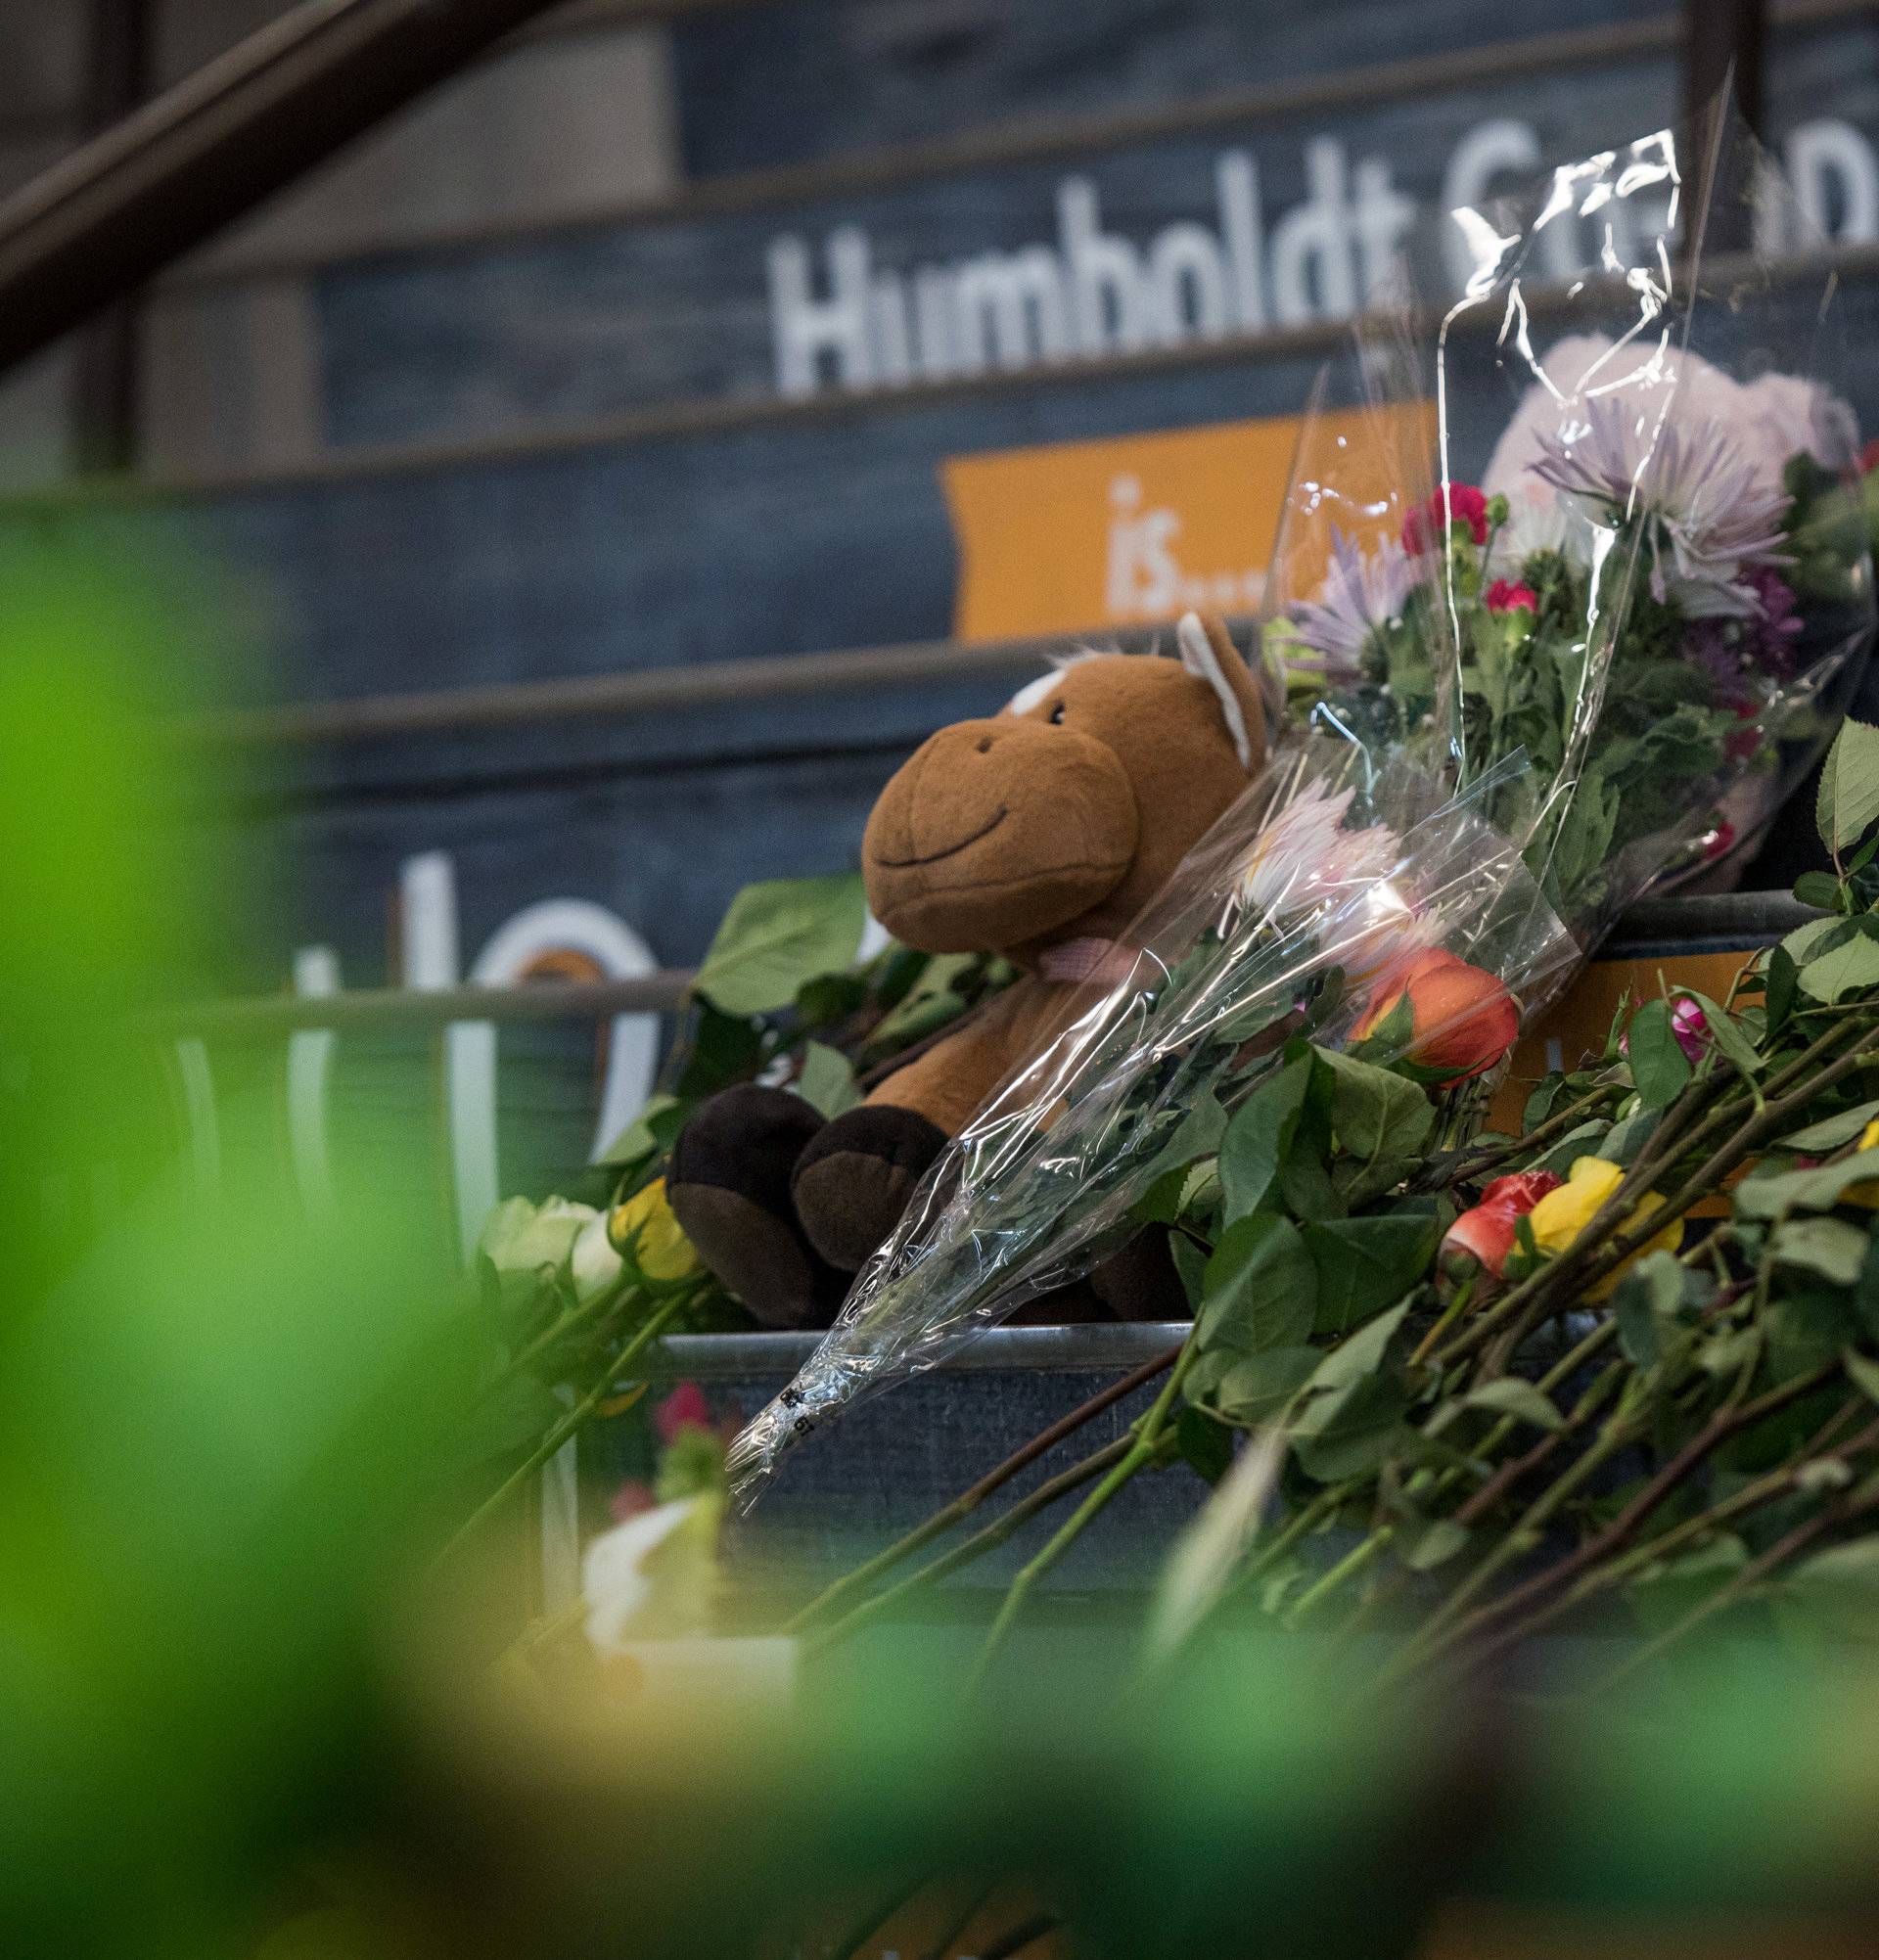 Community members leave notes and flowers at a memorial for the Humboldt Broncos team leading into the Elgar Petersen Arena in Humboldt Saskatchewan